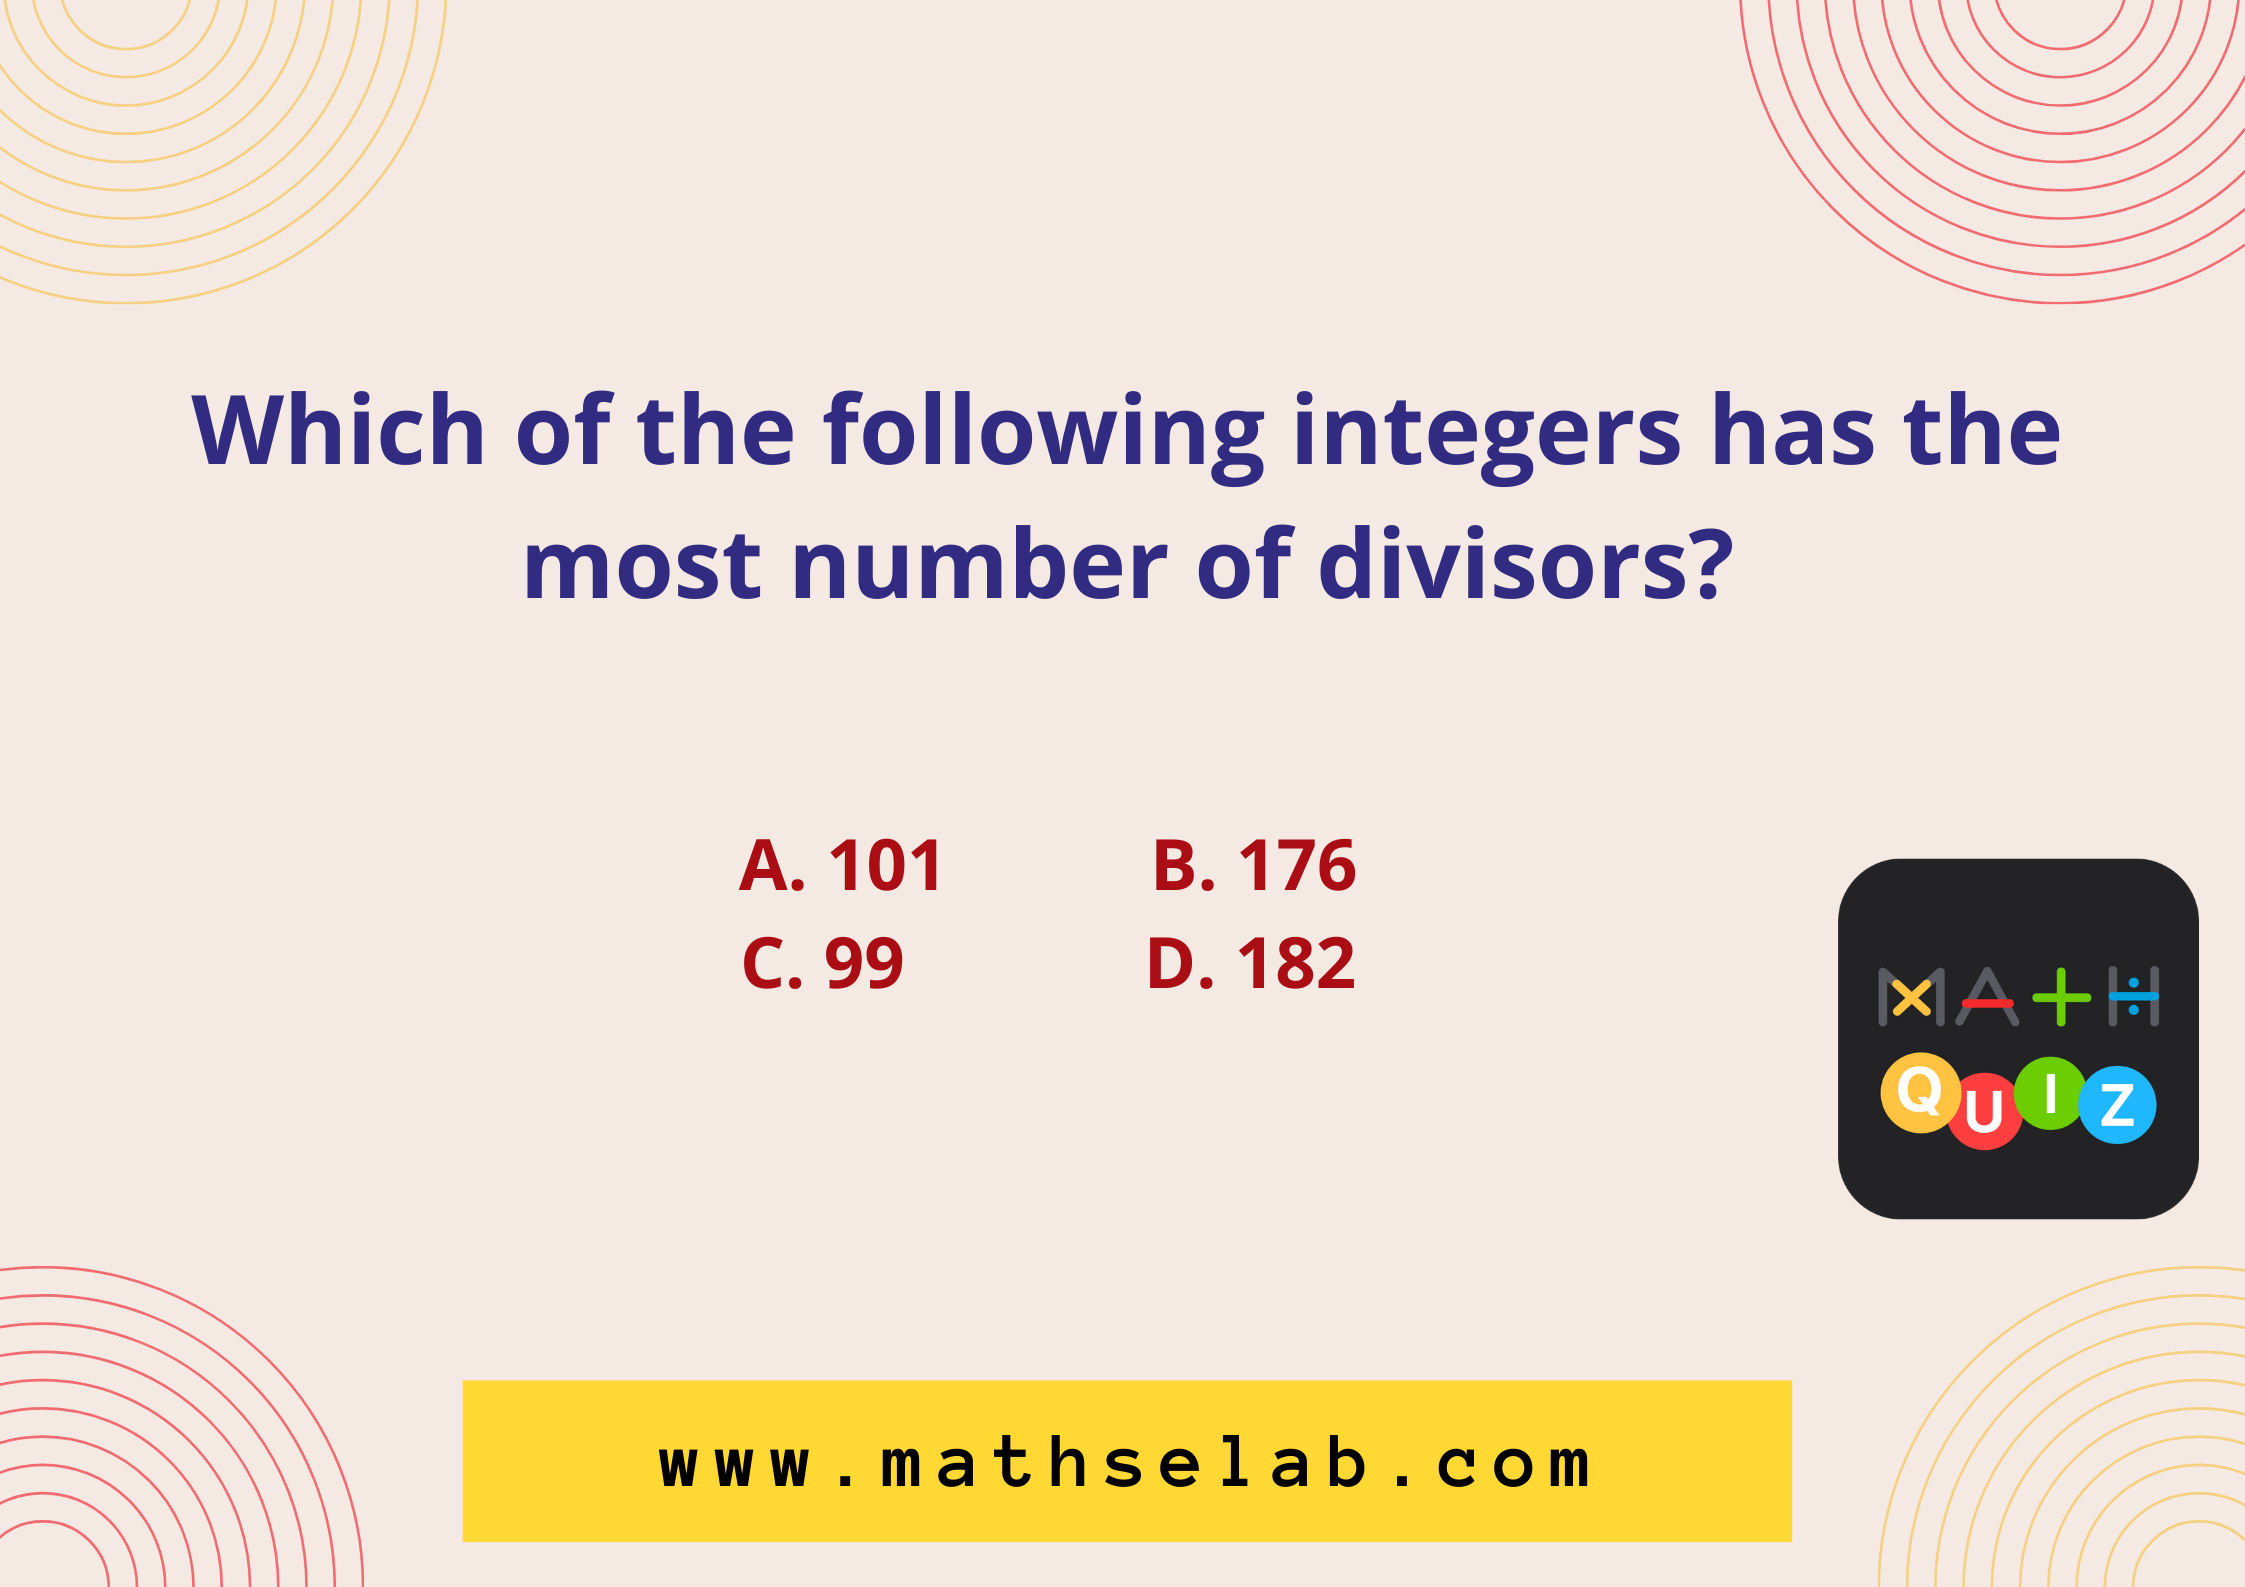 Which of the following integers has the most number of divisors?